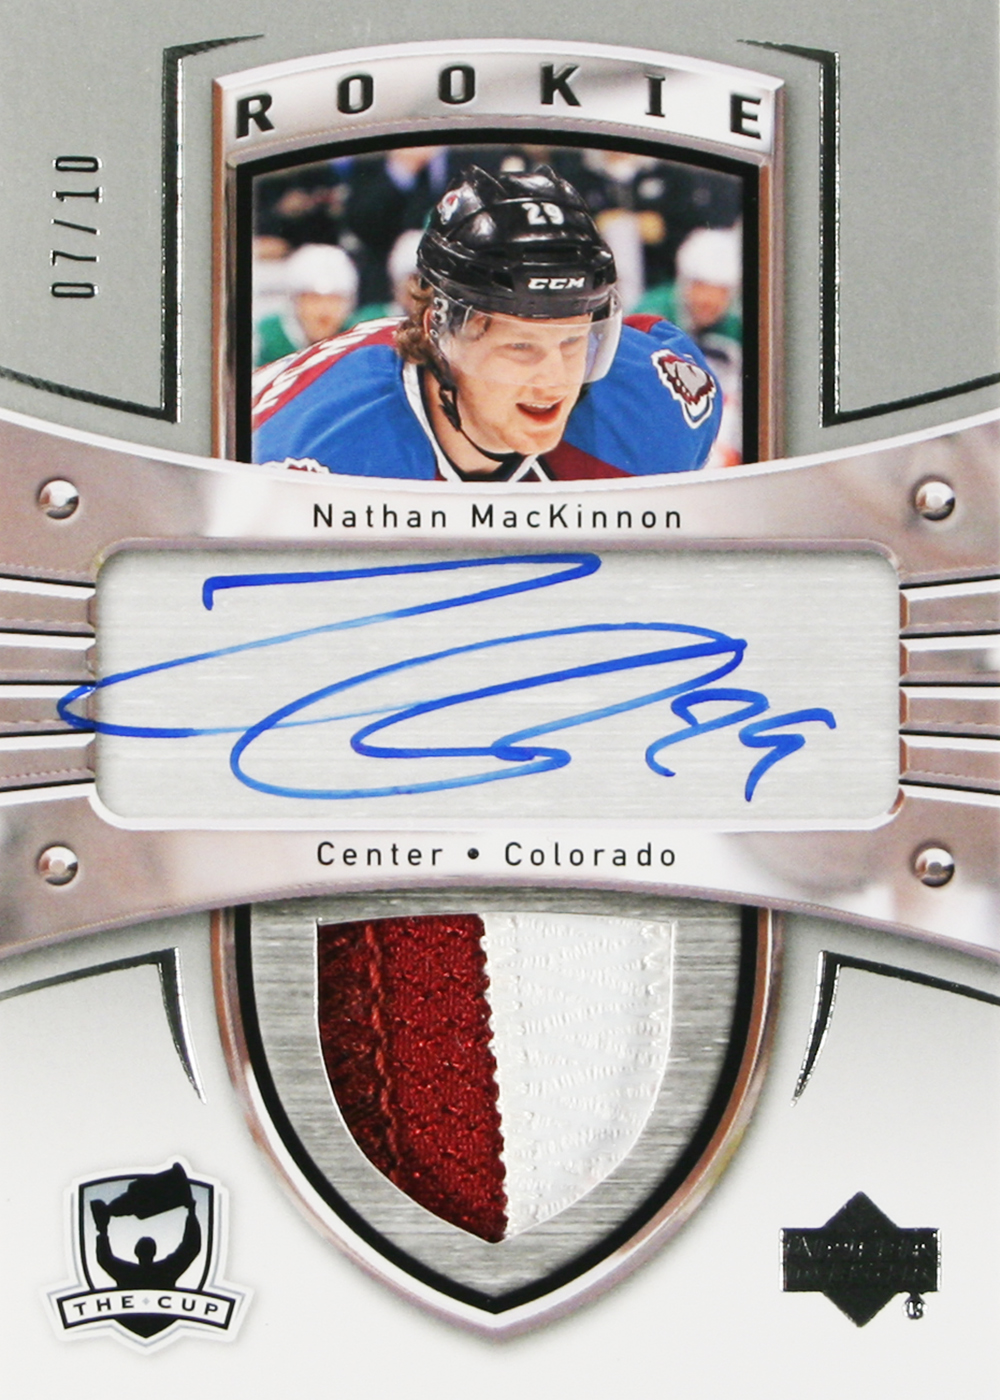 Nathan MacKinnon Autographed Memorabilia  Signed Photo, Jersey,  Collectibles & Merchandise